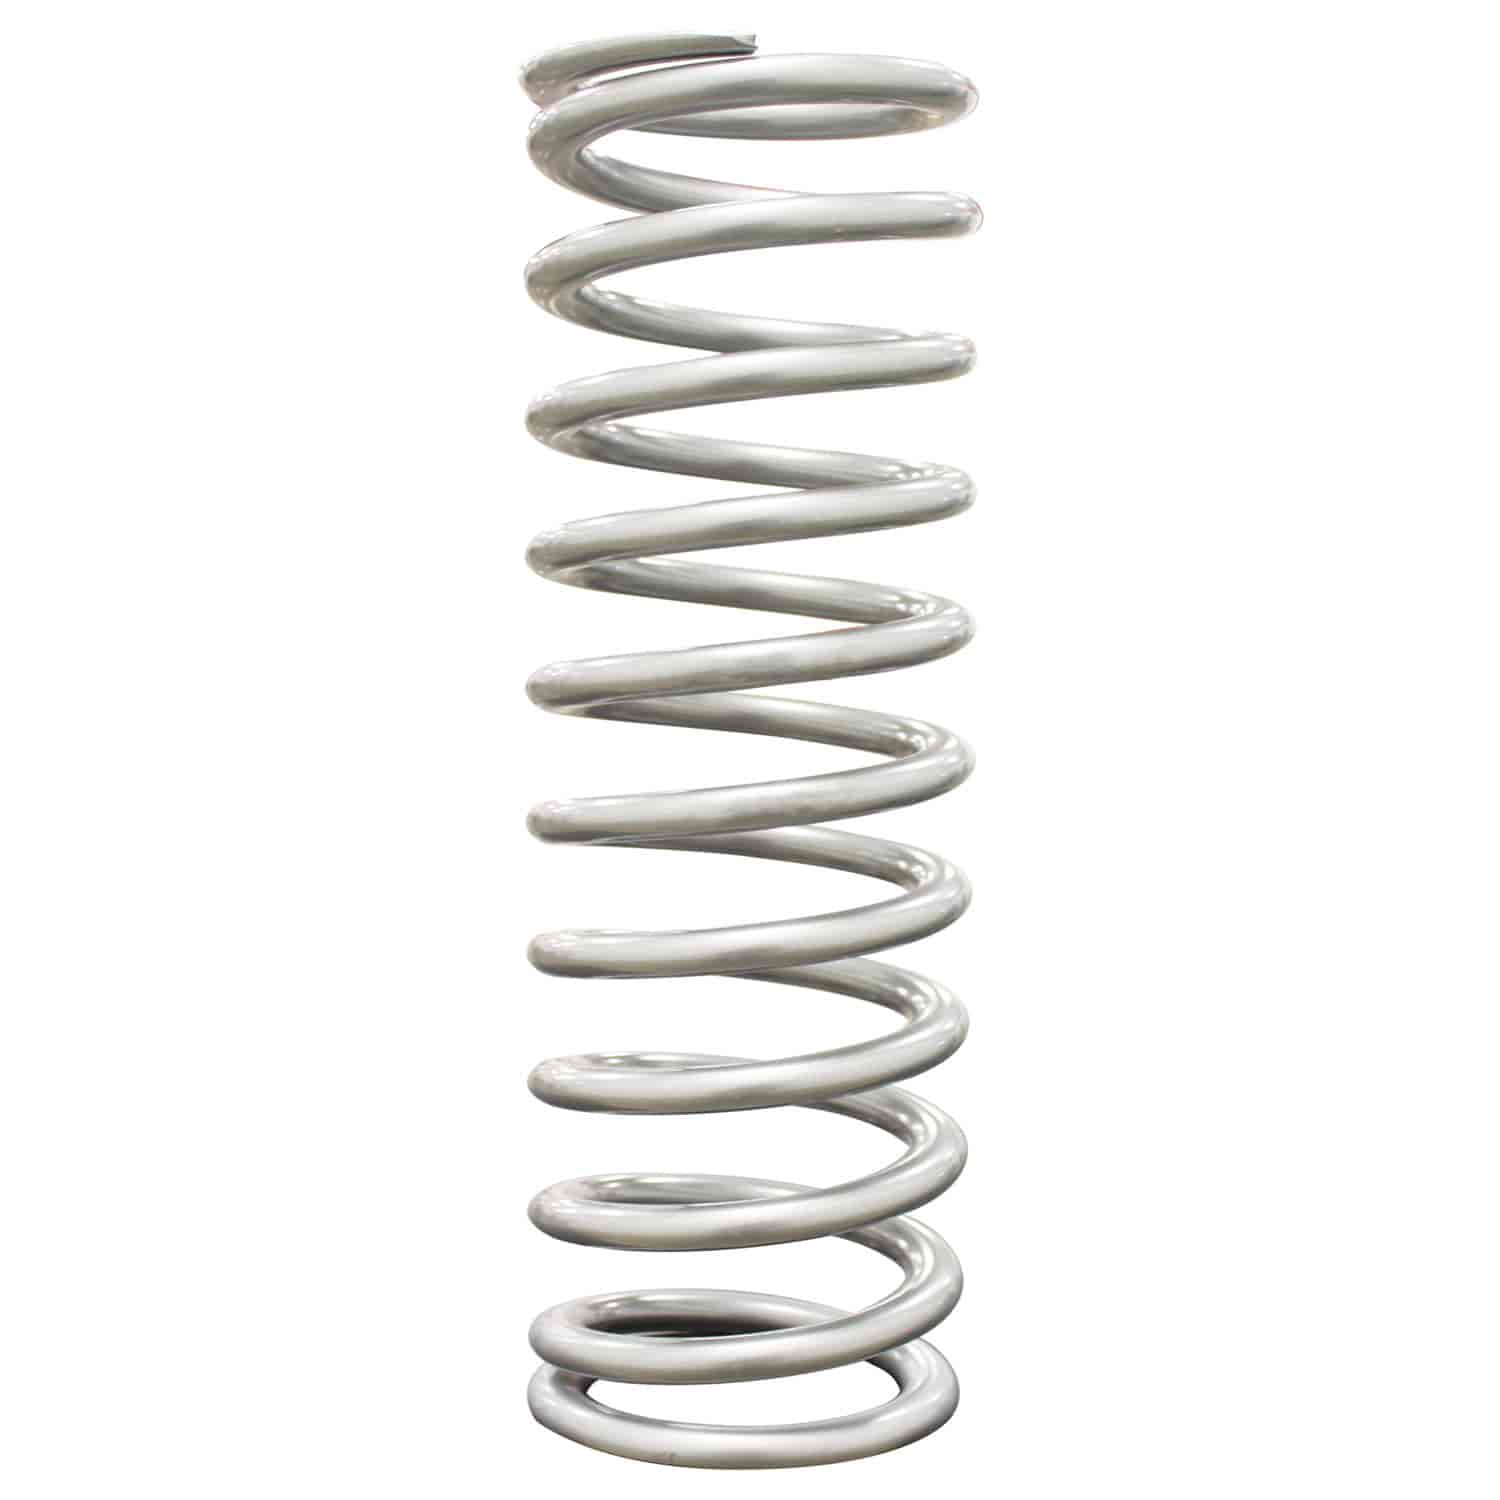 Powder-coated High Travel Coil Spring 14 in. Length